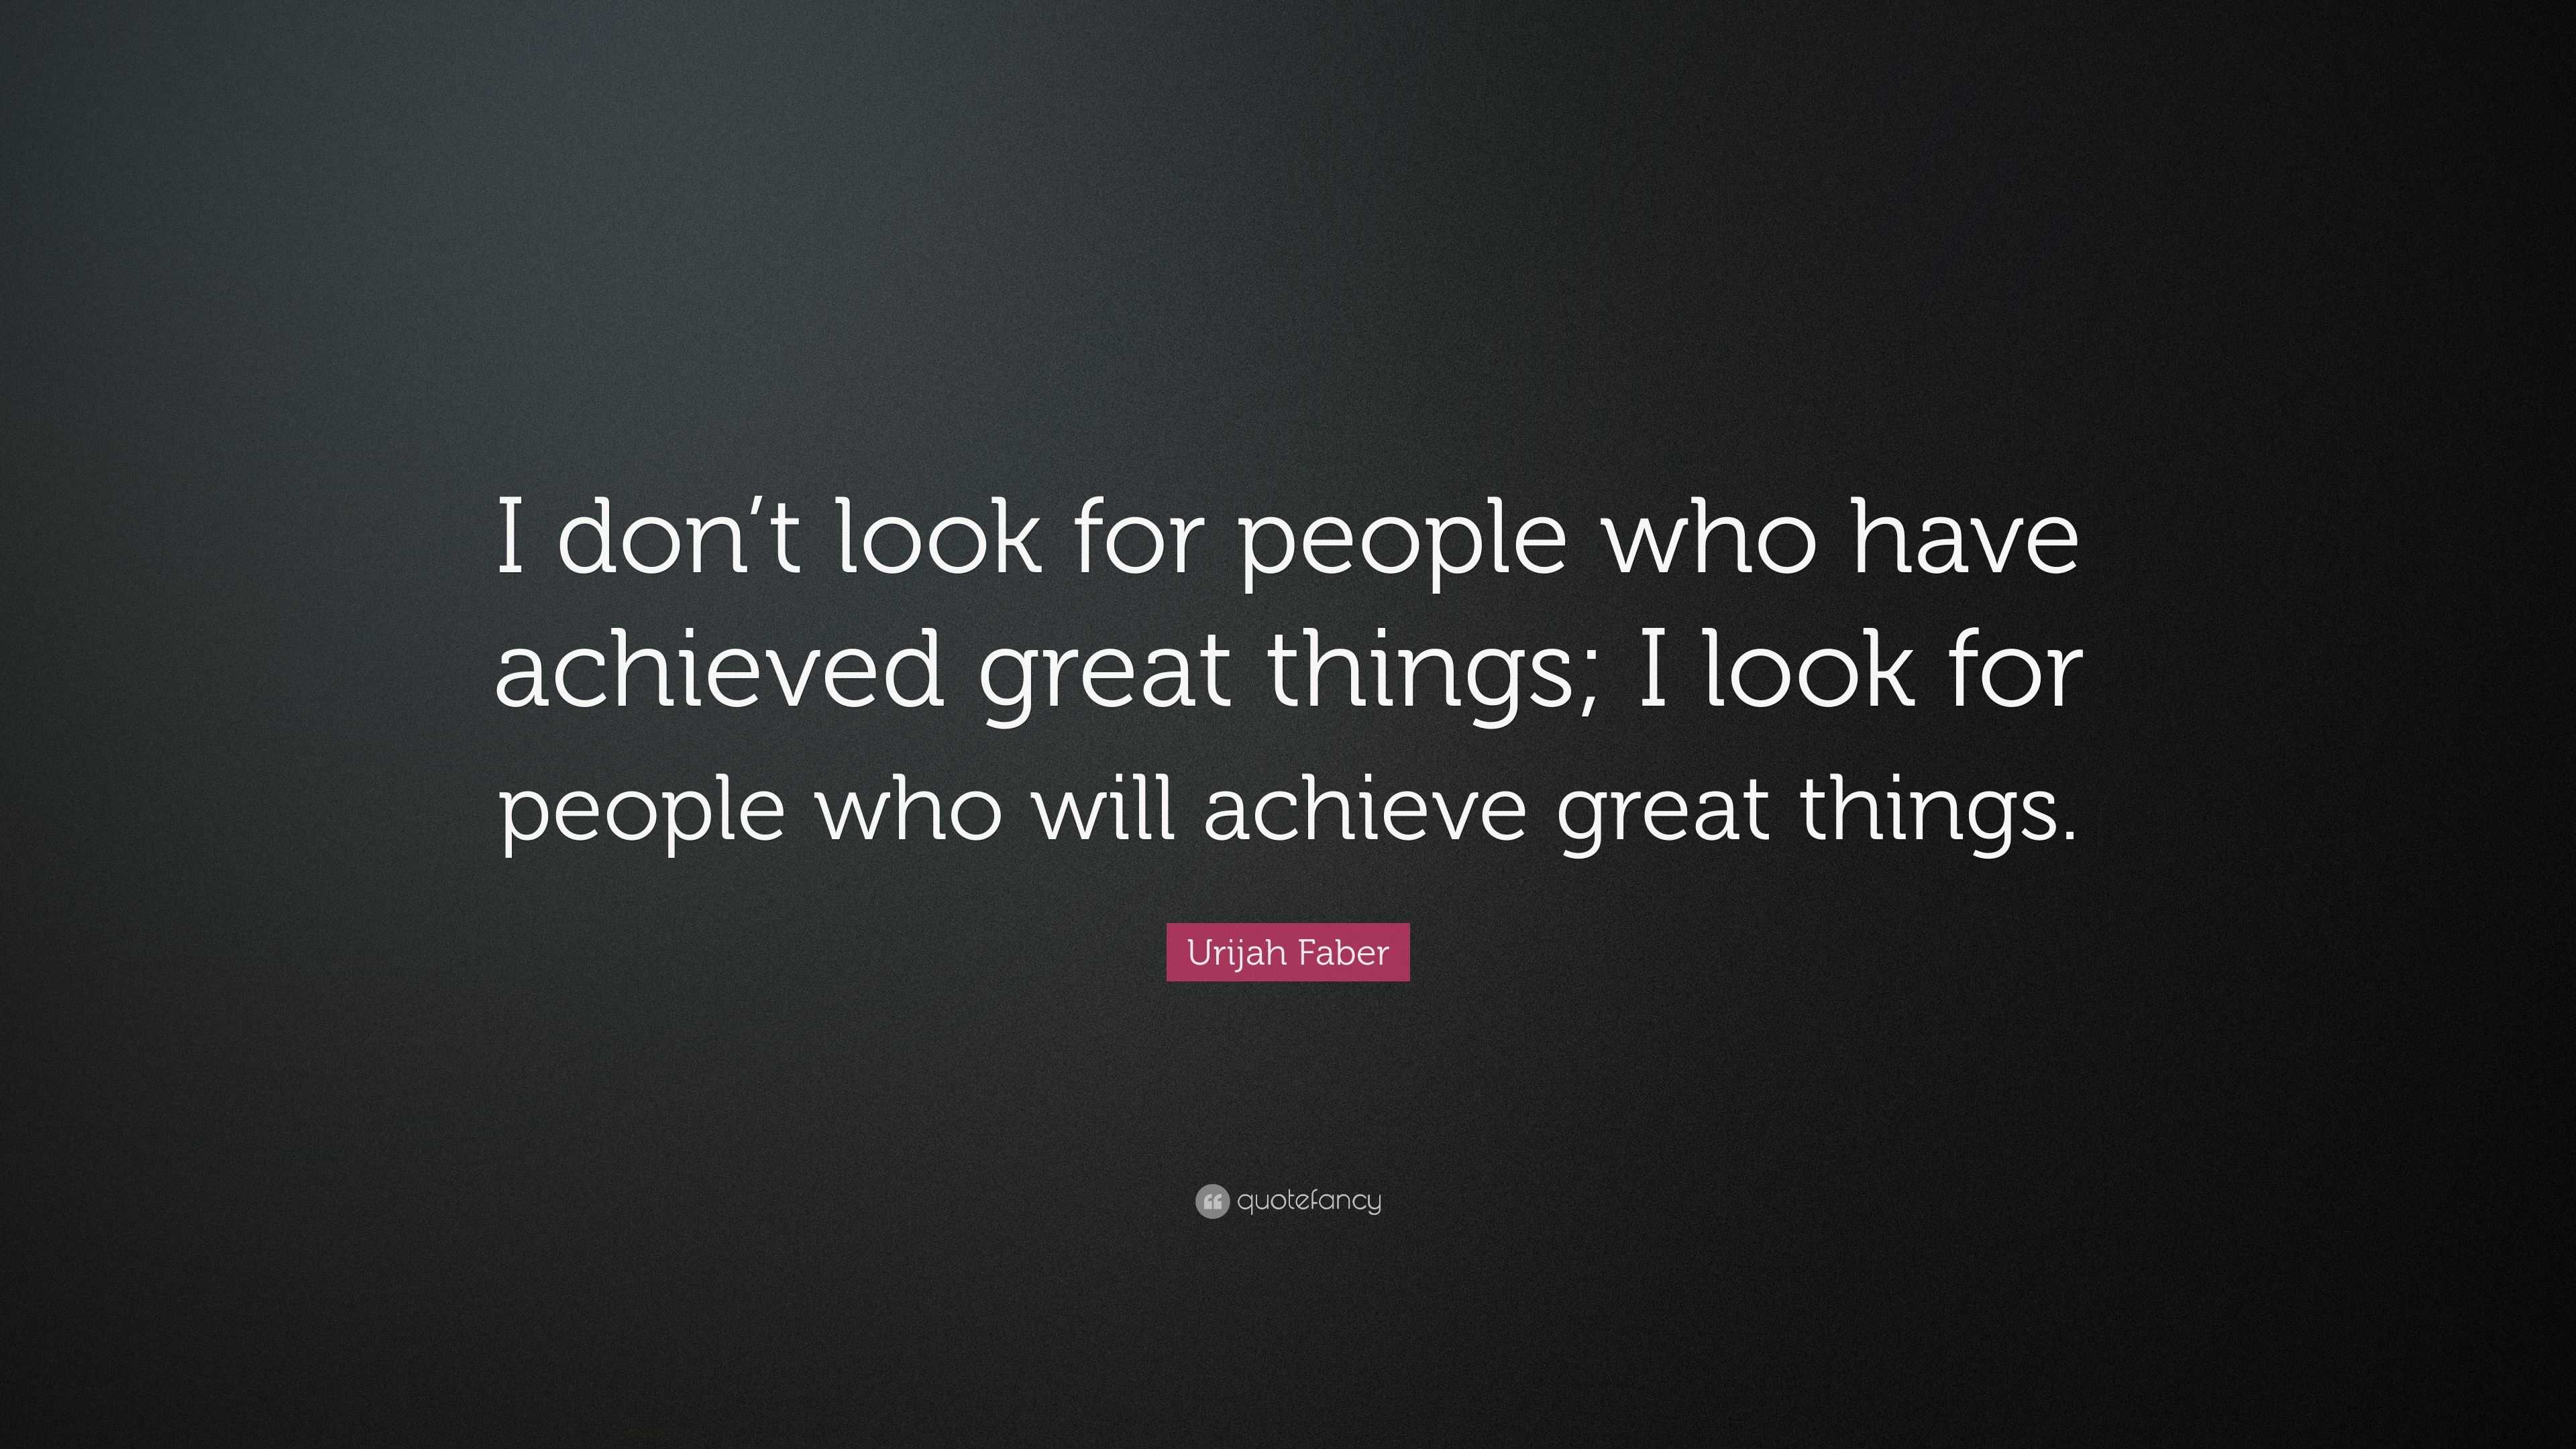 Urijah Faber Quote: “I don’t look for people who have achieved great ...